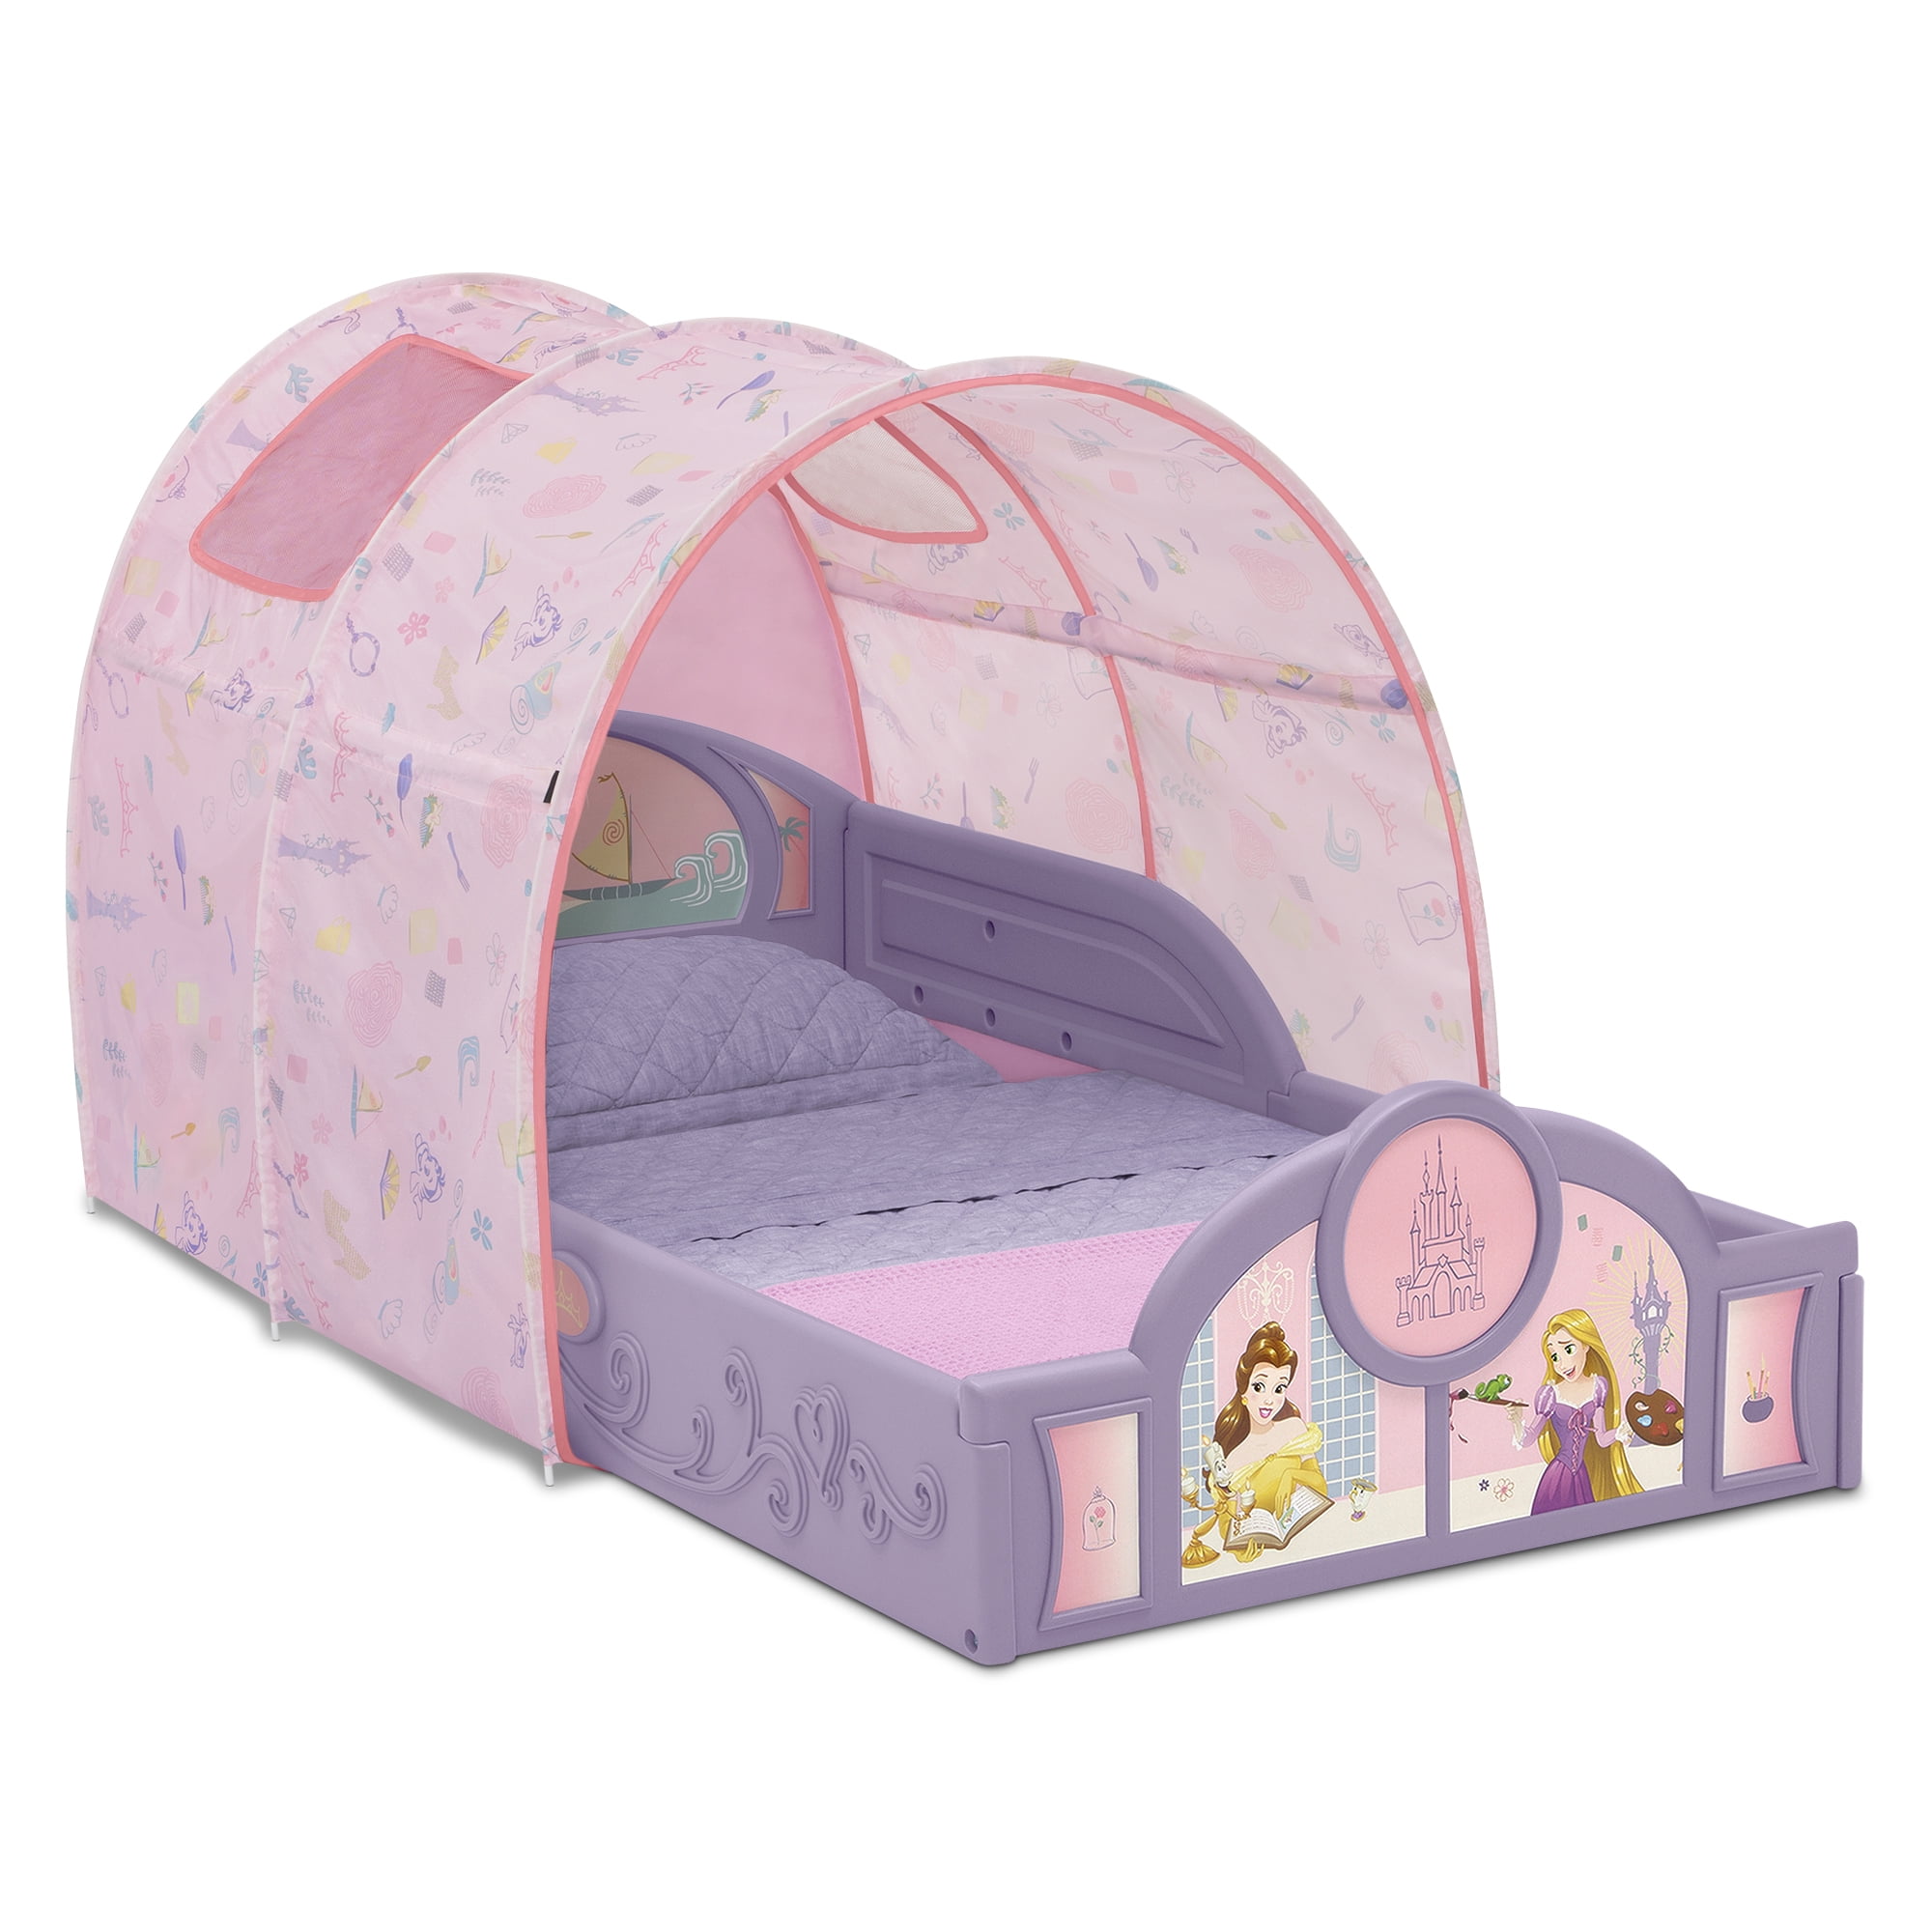 Princess Sleep and Bed with Tent by Delta Children, Purple/Pink Walmart.com